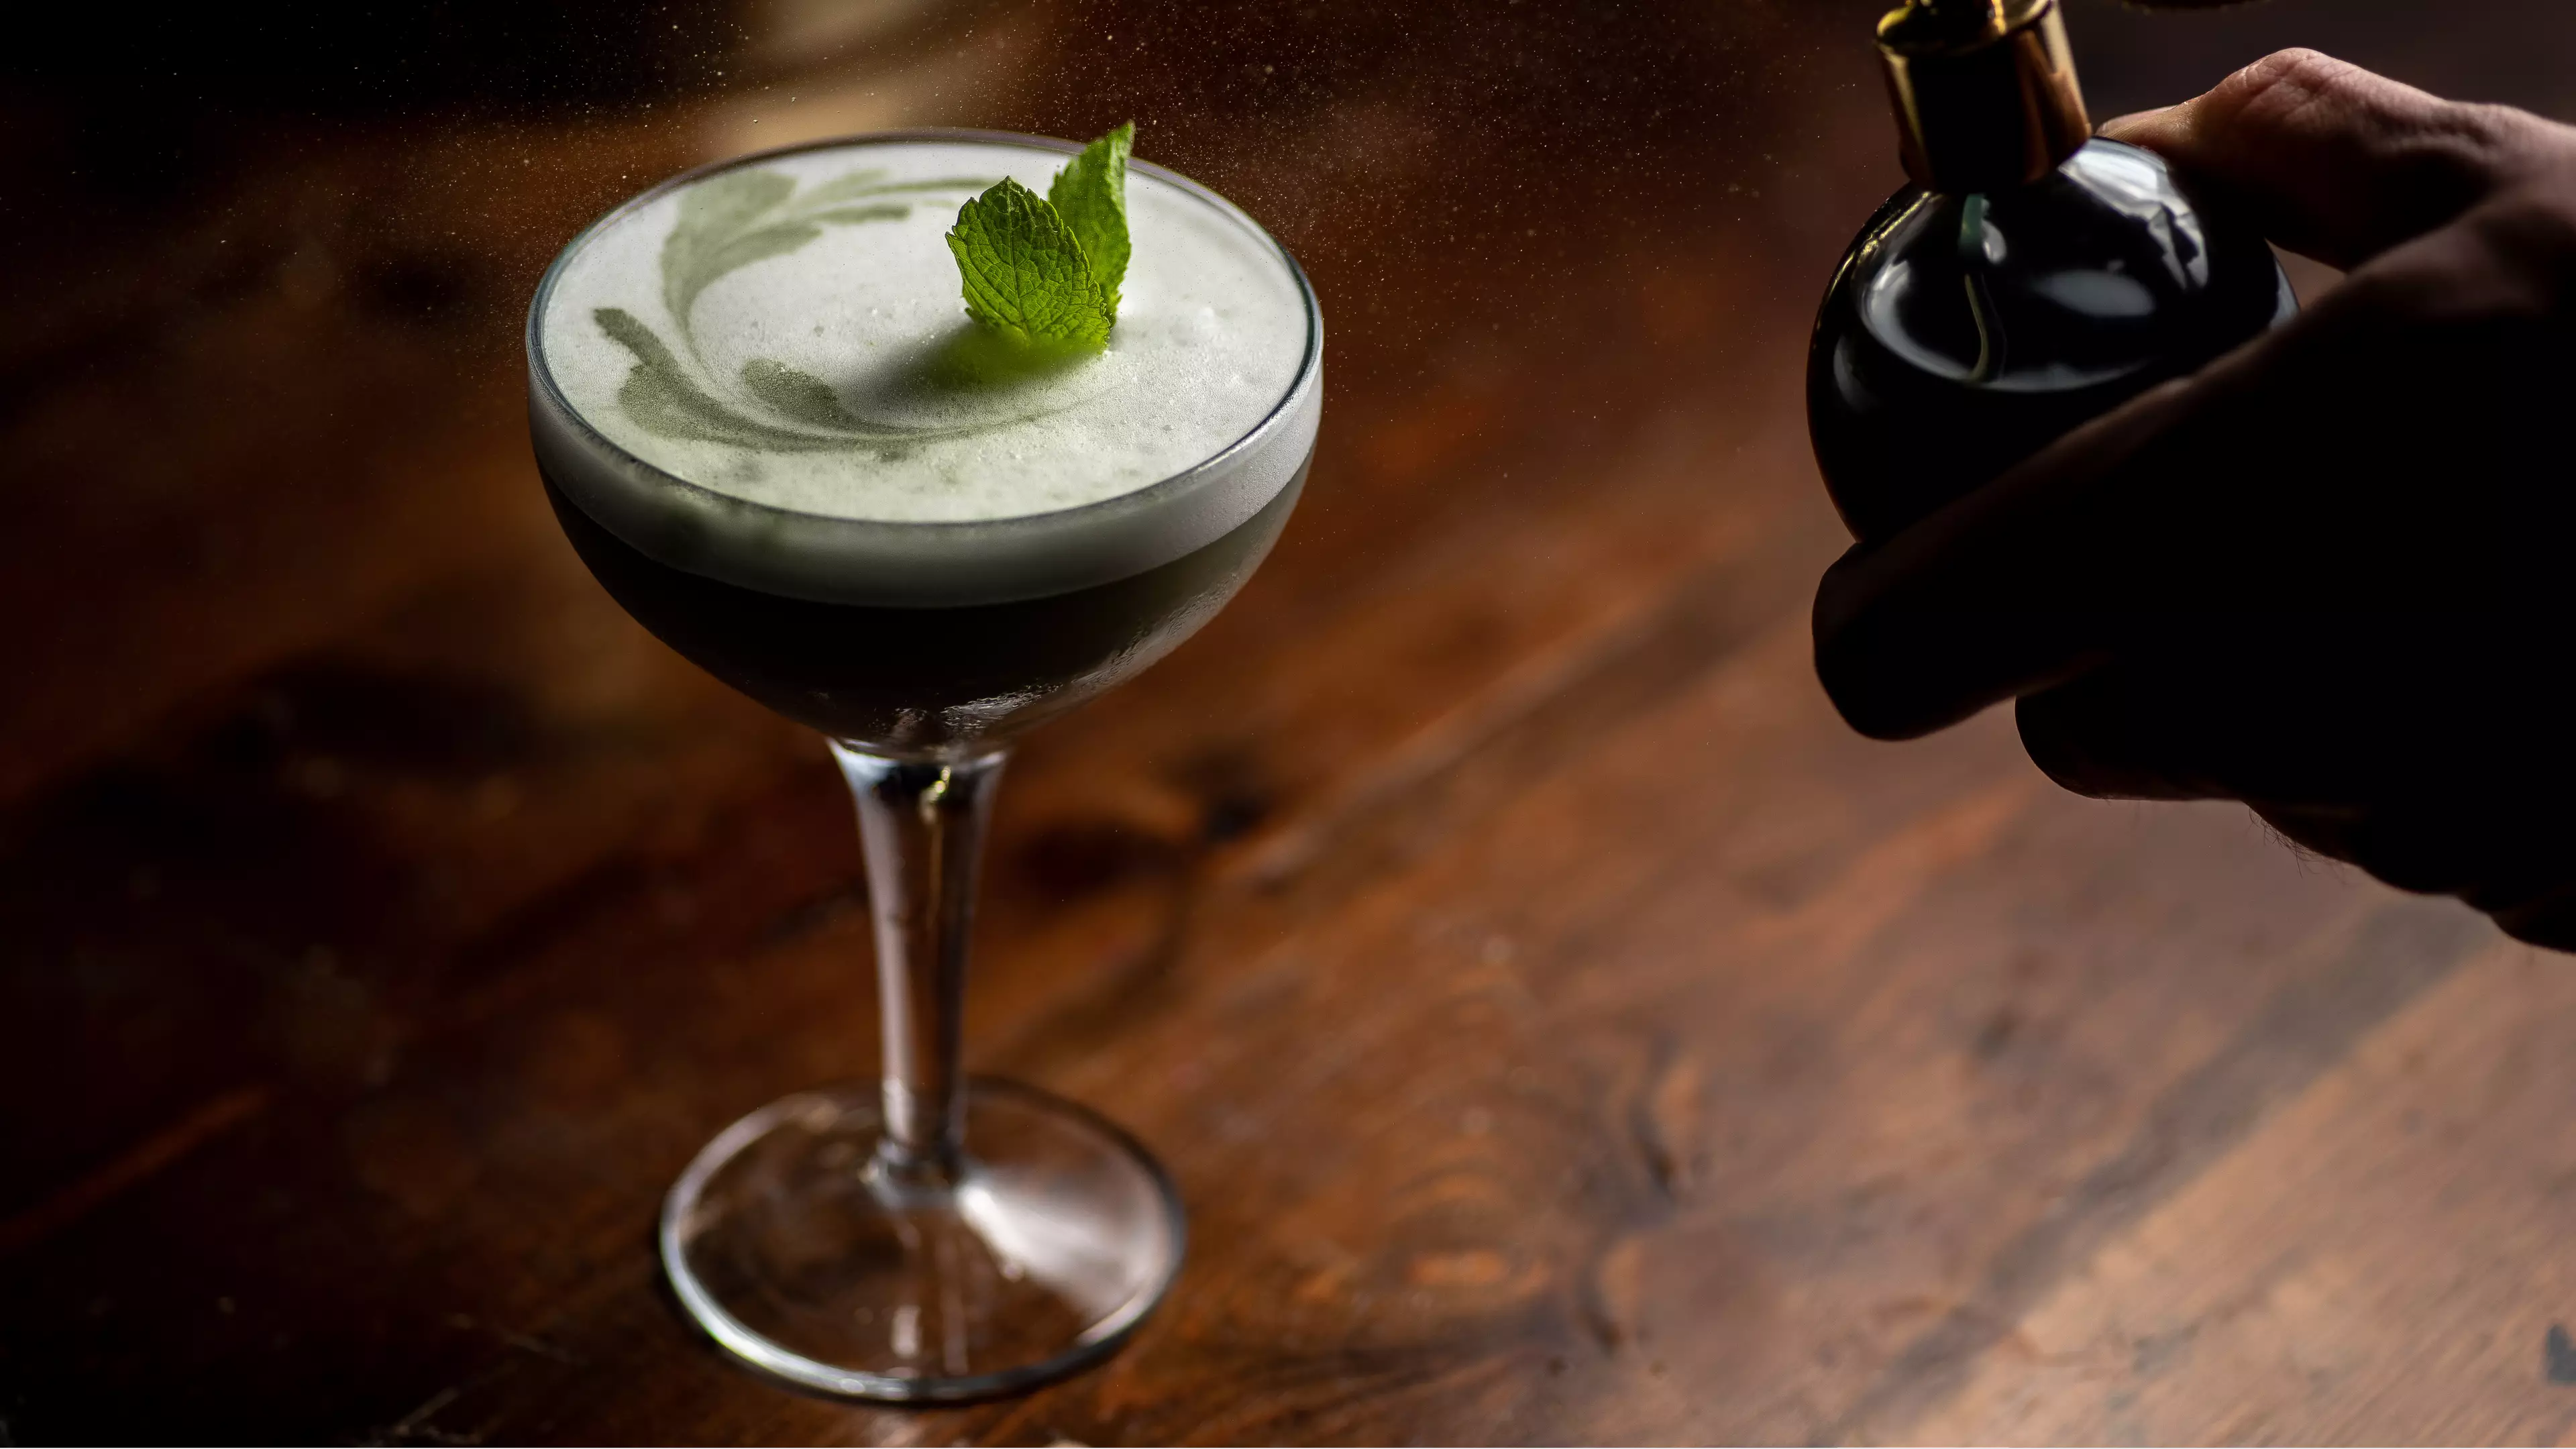 This Chlorophyll Brunch Cocktail Could Cure Your Hangover